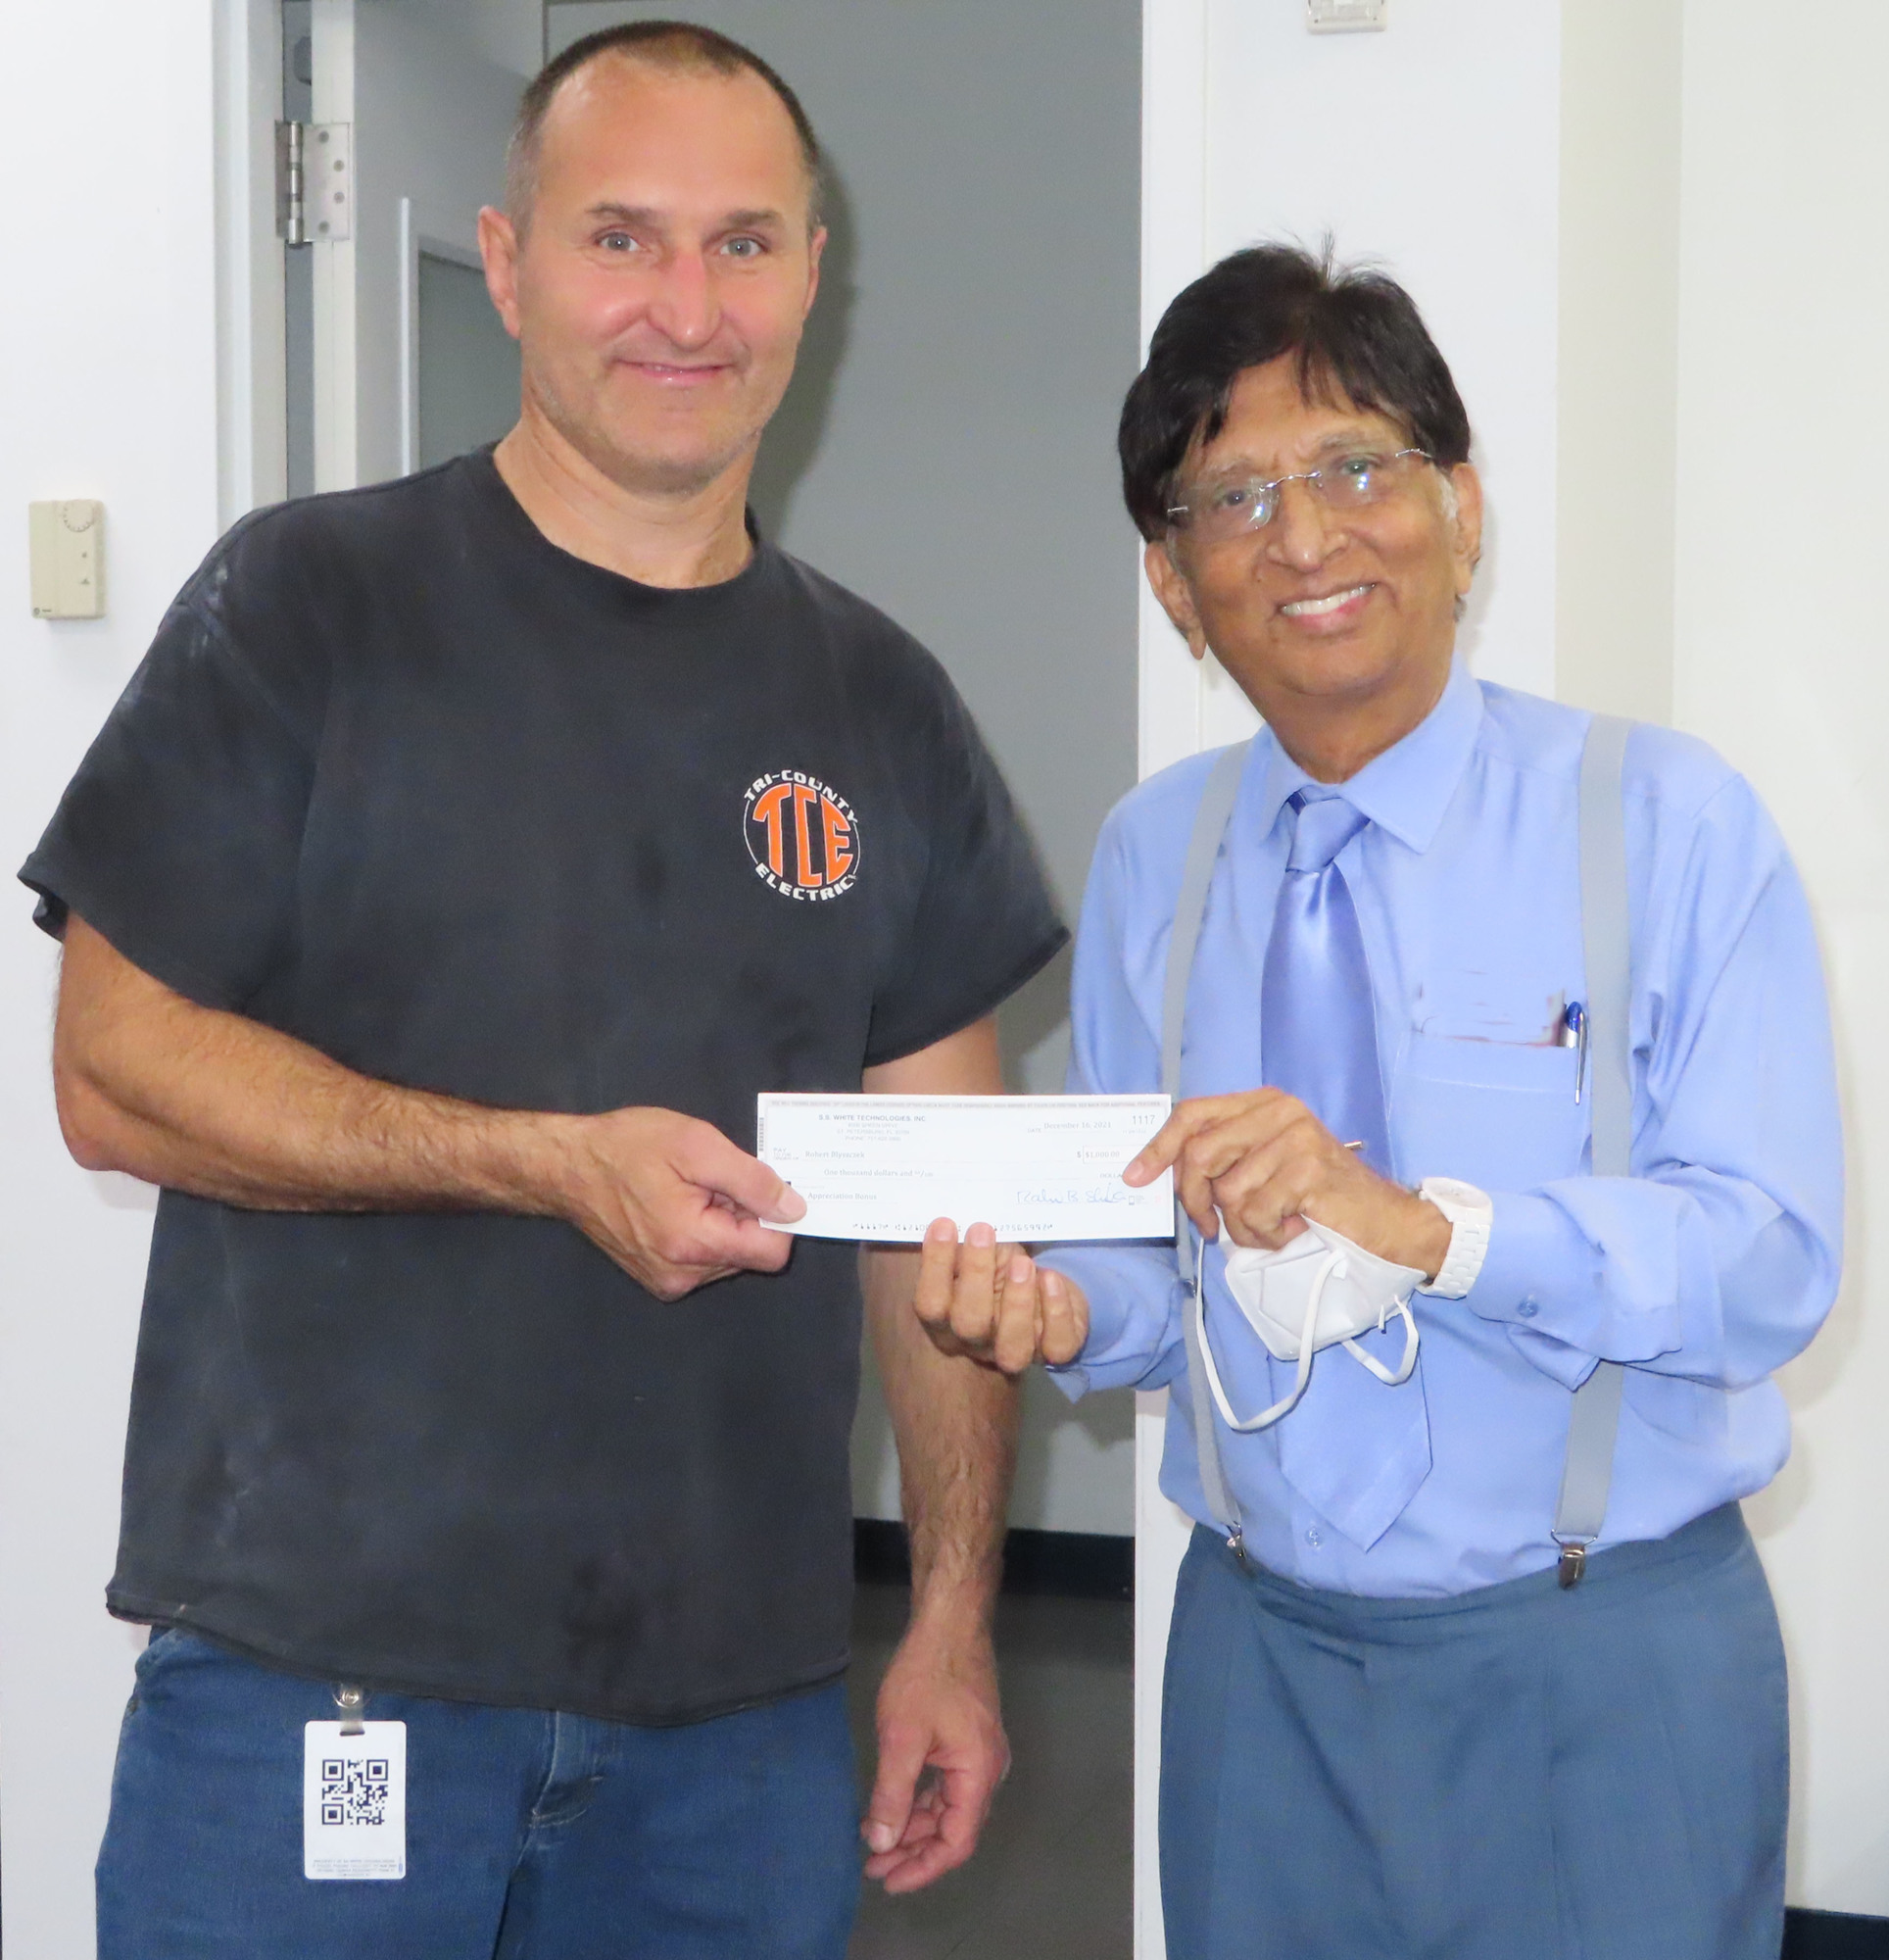 Courtesy. S.S. White Technologies and Shukla Medical owner and CEO Rahul Shukla, left, gives a $1,000 holiday bonus check to staff member Robert Blyszczek.